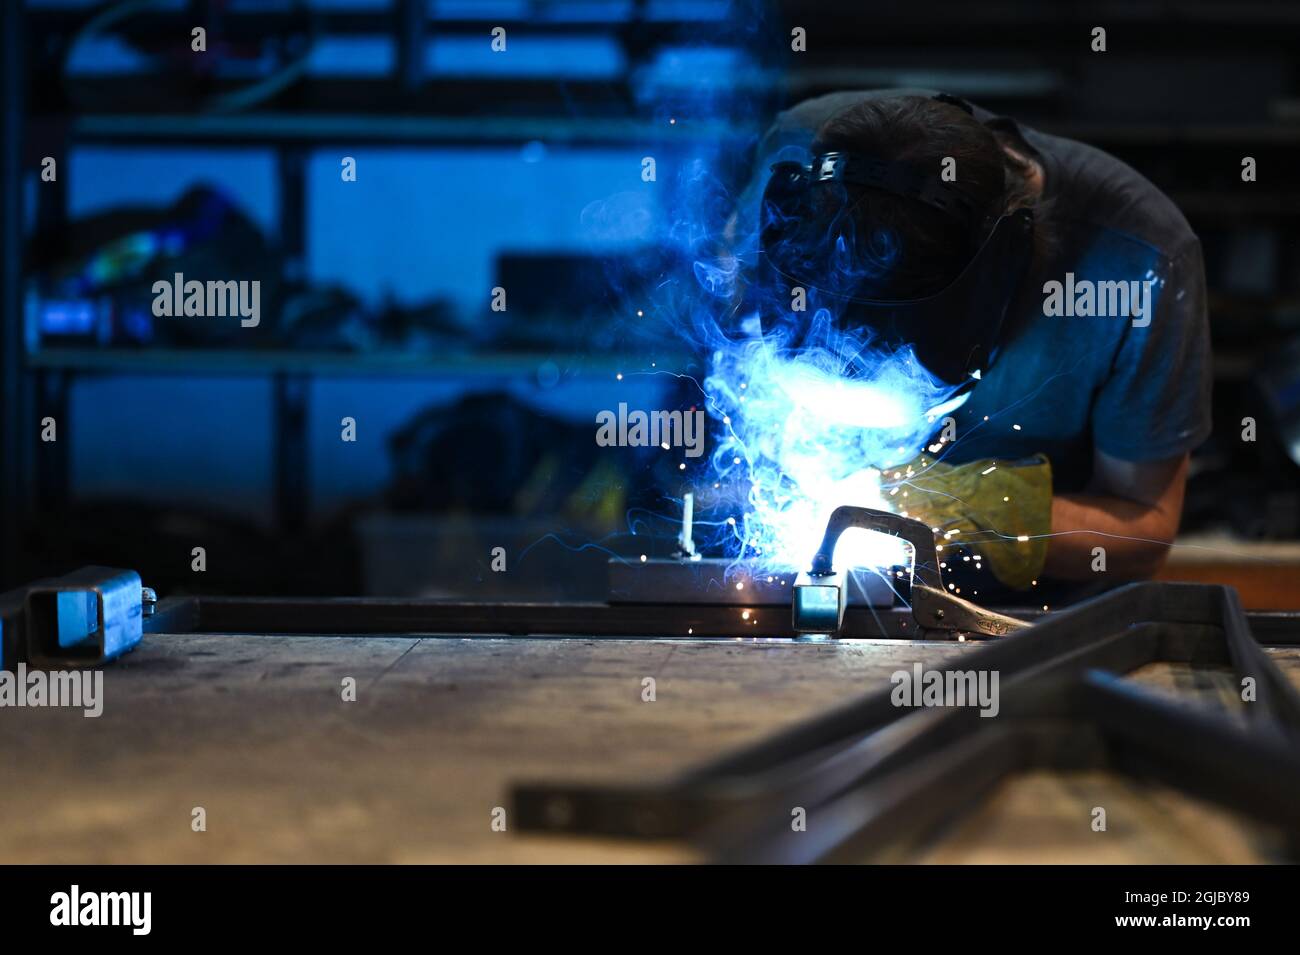 Welding with big sparks Stock Photo